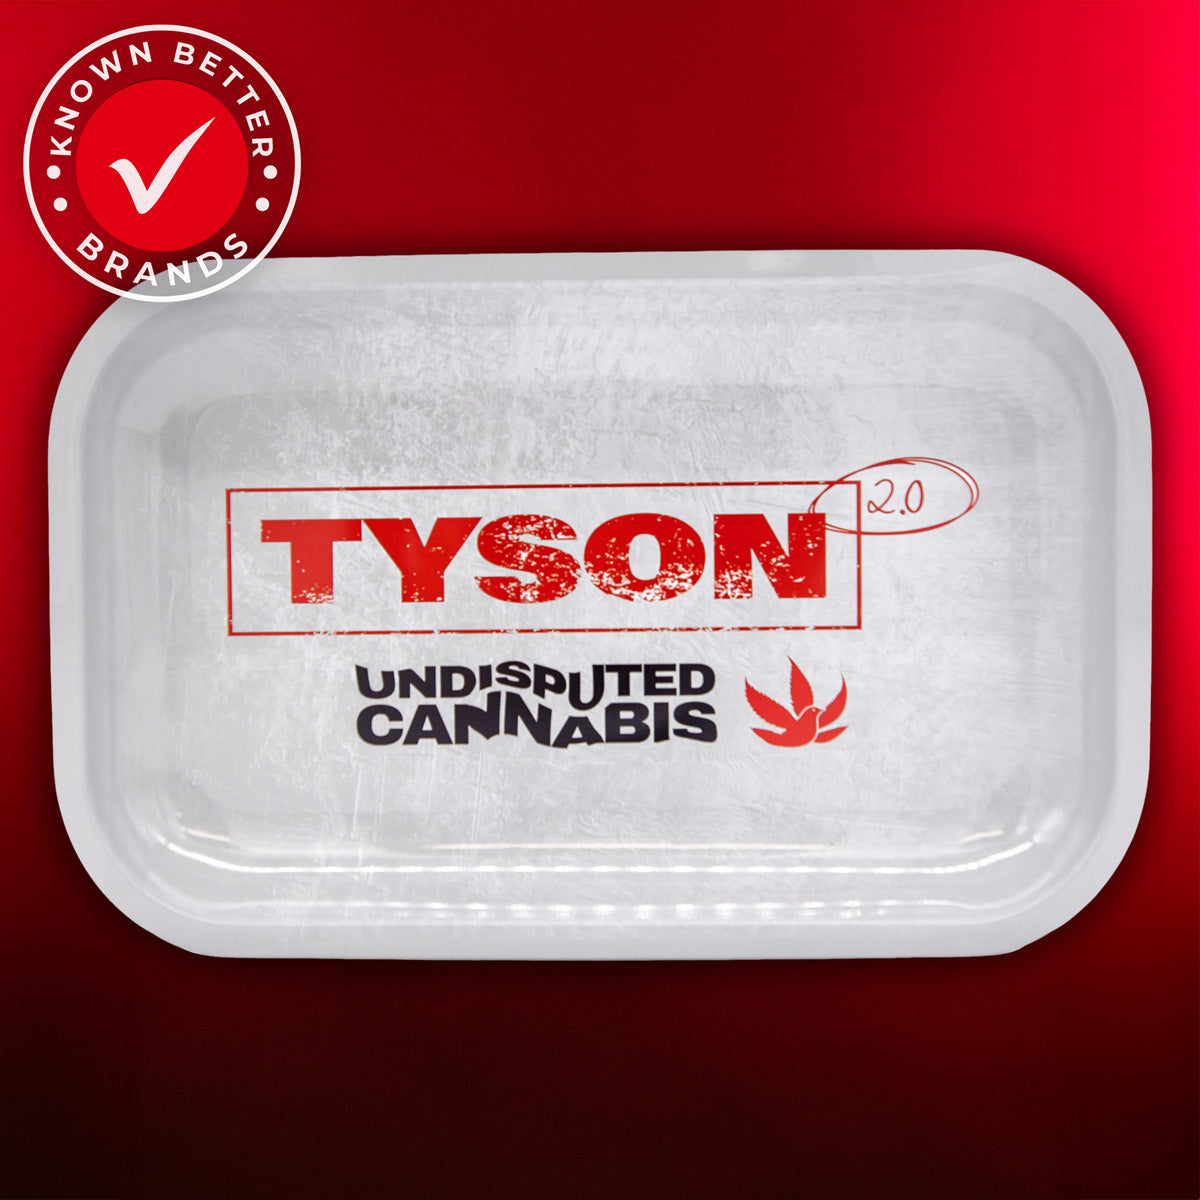 White Unidsputed Cannabis Rolling Tray by TYSON 2.0 features a red tyson 2.0 logo, pigeon bird weed logo